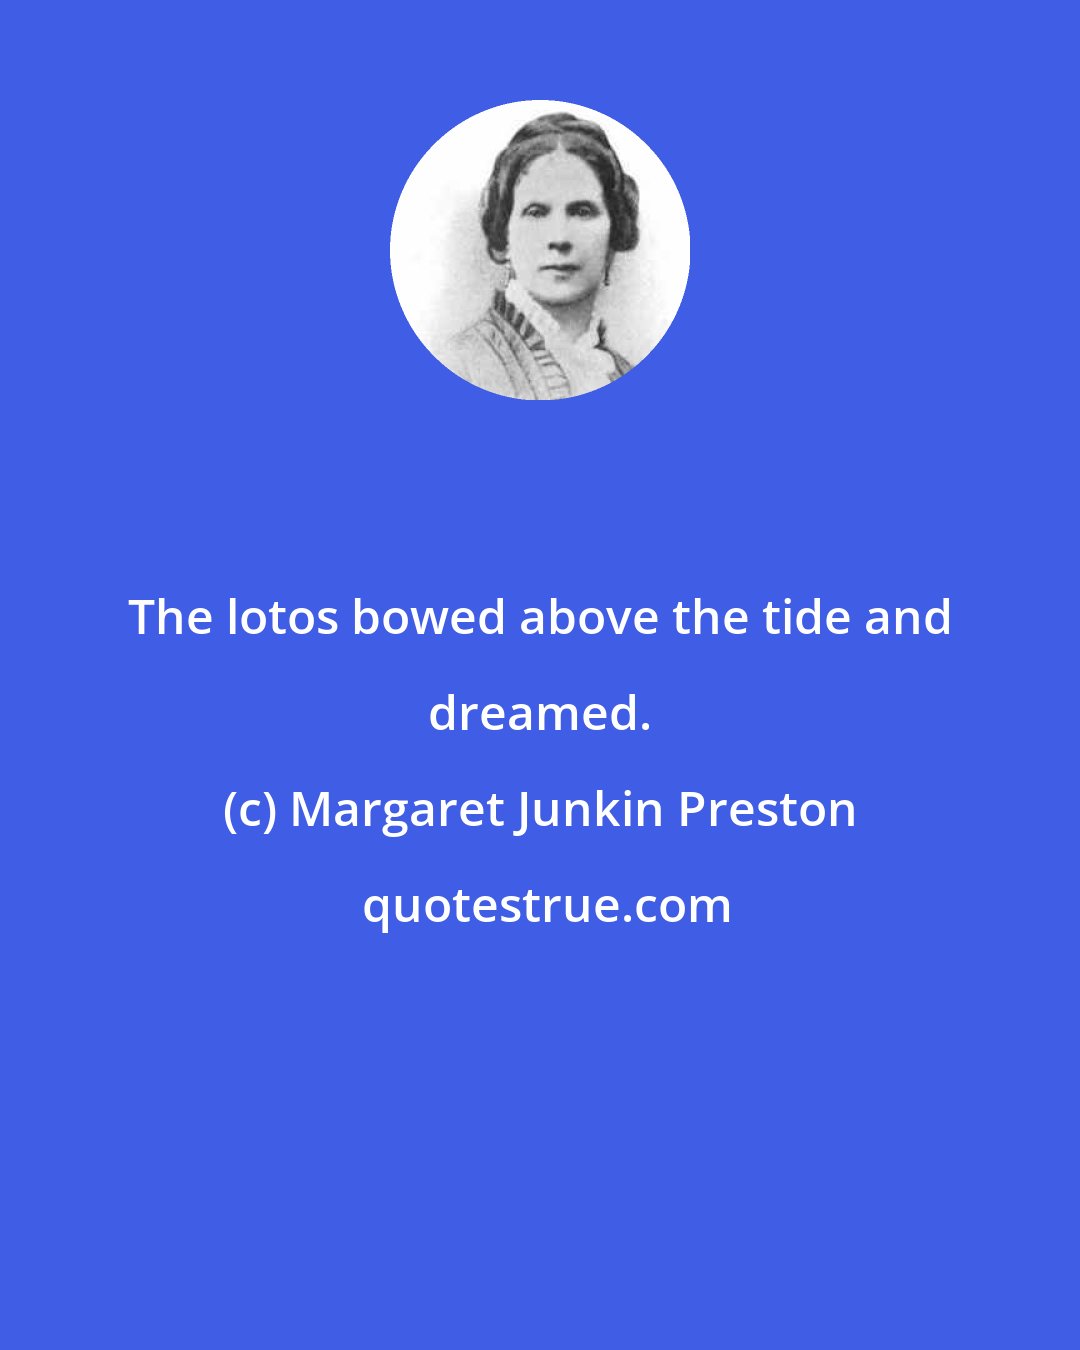 Margaret Junkin Preston: The lotos bowed above the tide and dreamed.